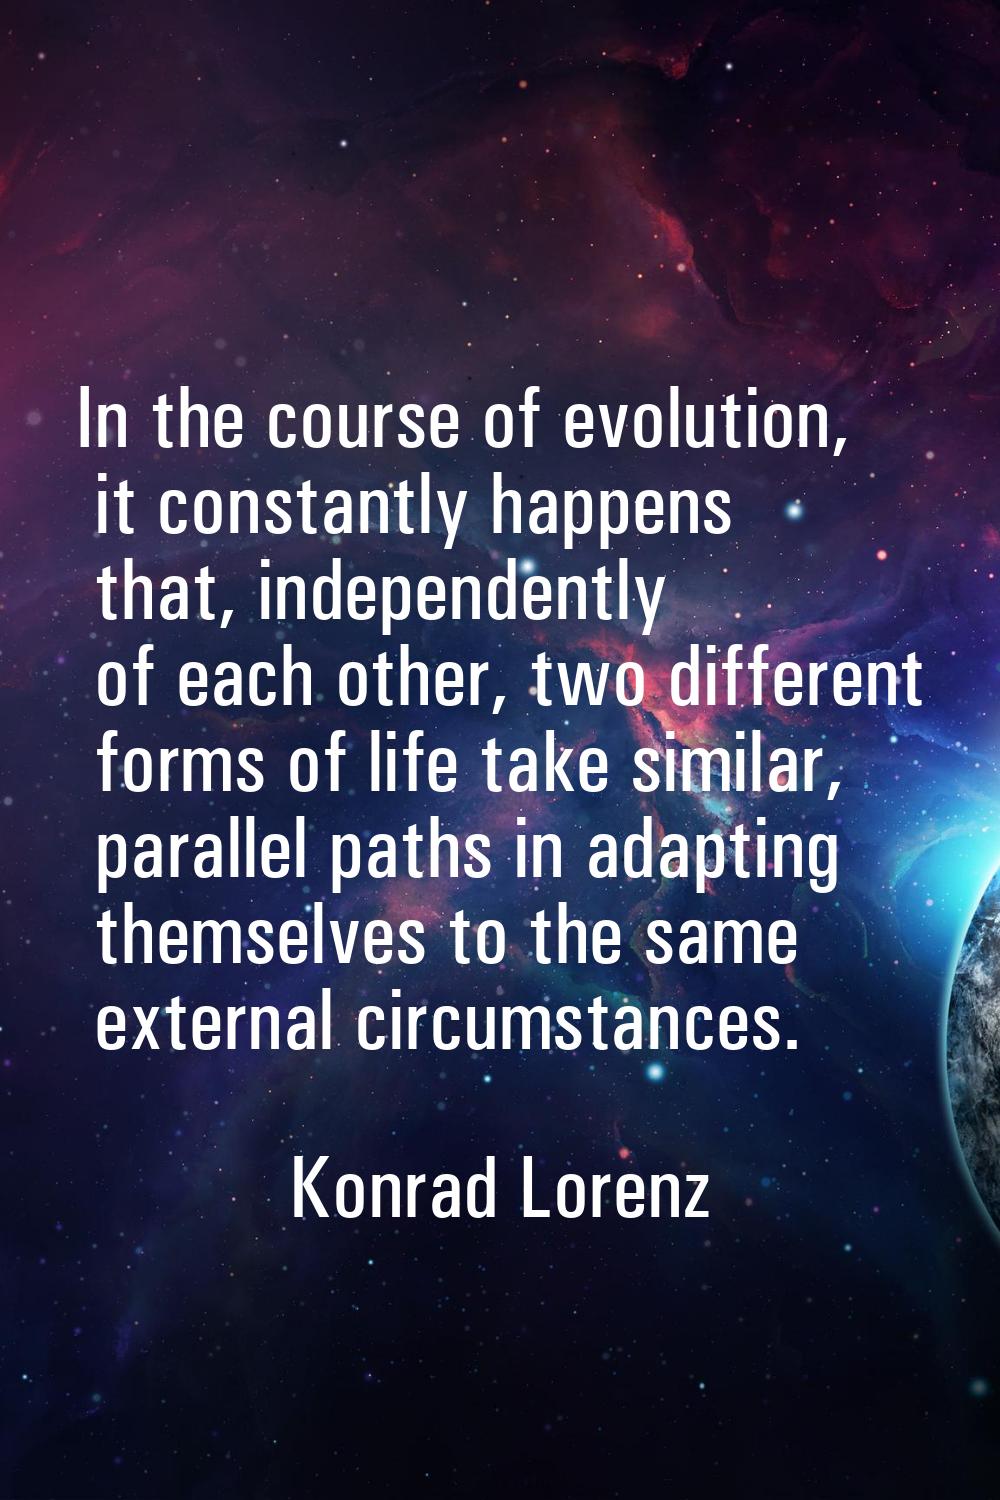 In the course of evolution, it constantly happens that, independently of each other, two different 